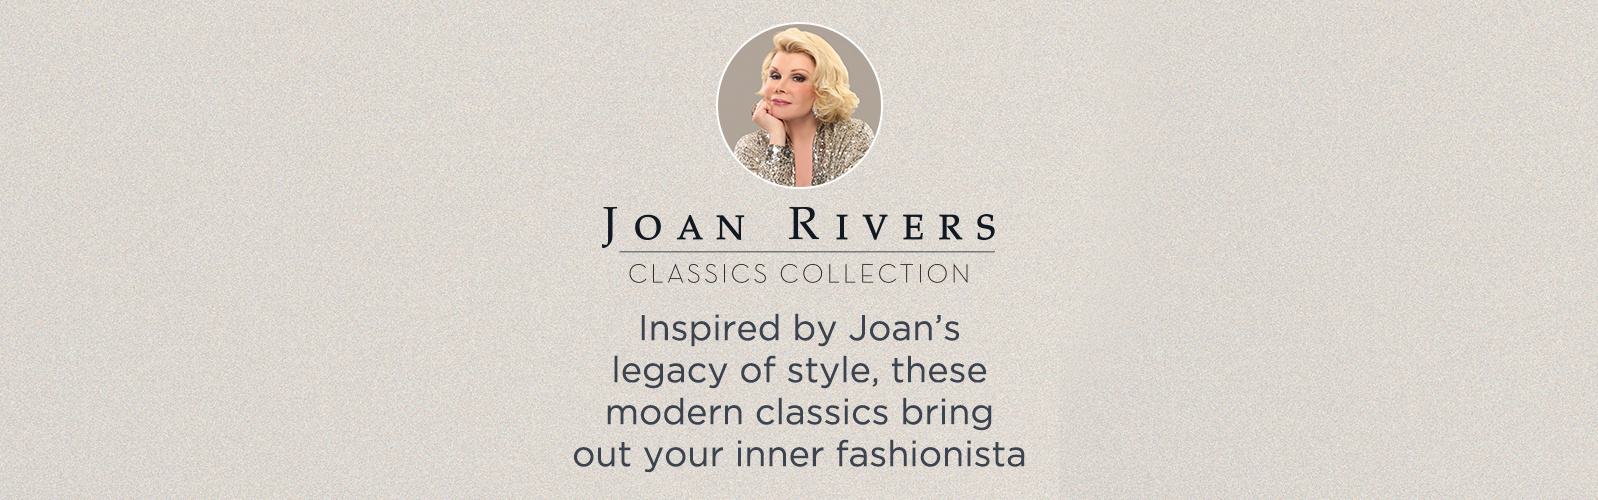 Joan Rivers Classics Collection - Inspired by Joan's legacy of style, these modern classics bring out your inner fashionista